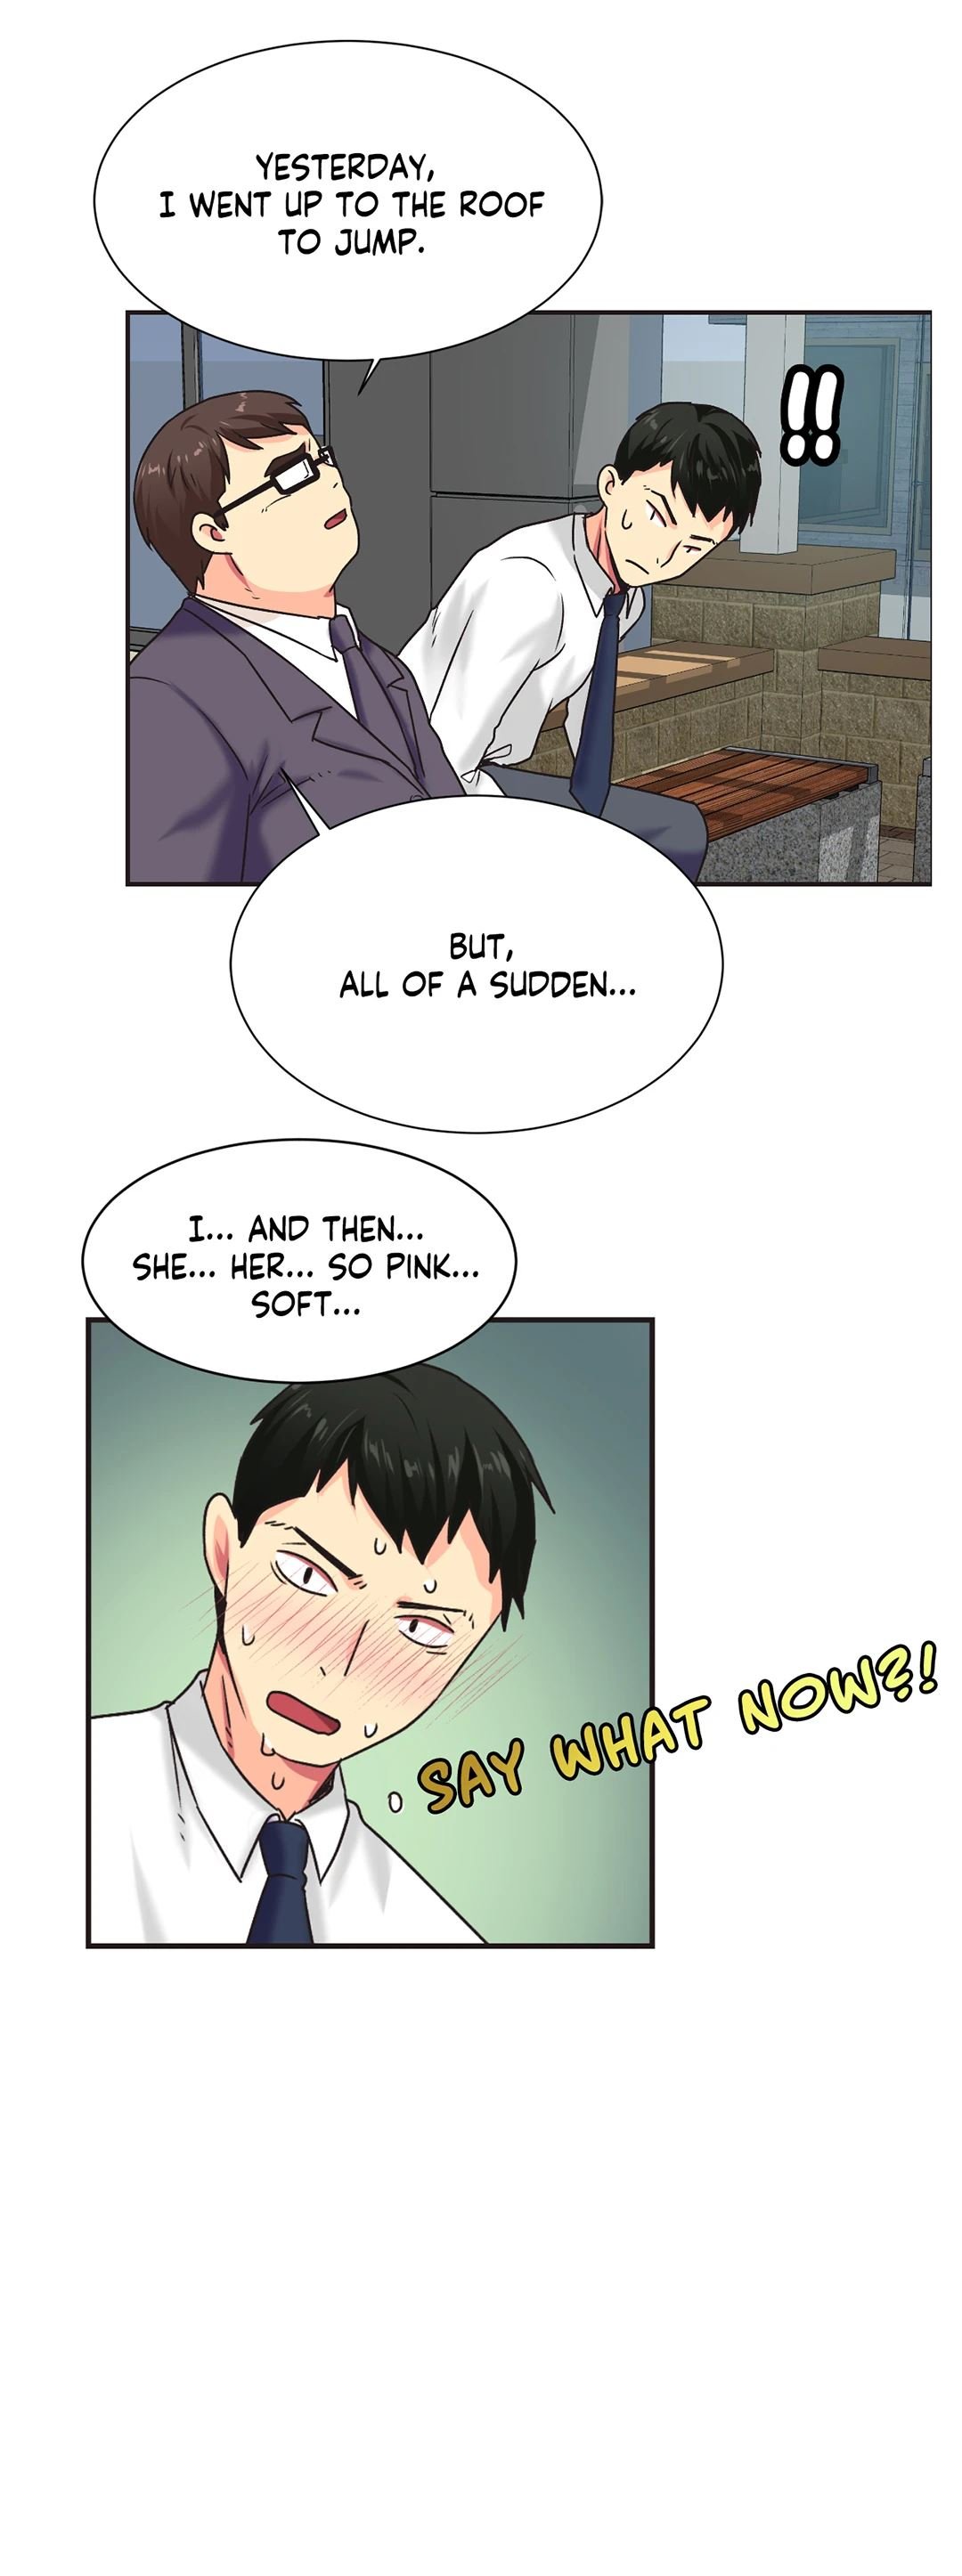 the-yes-girl-chap-3-29